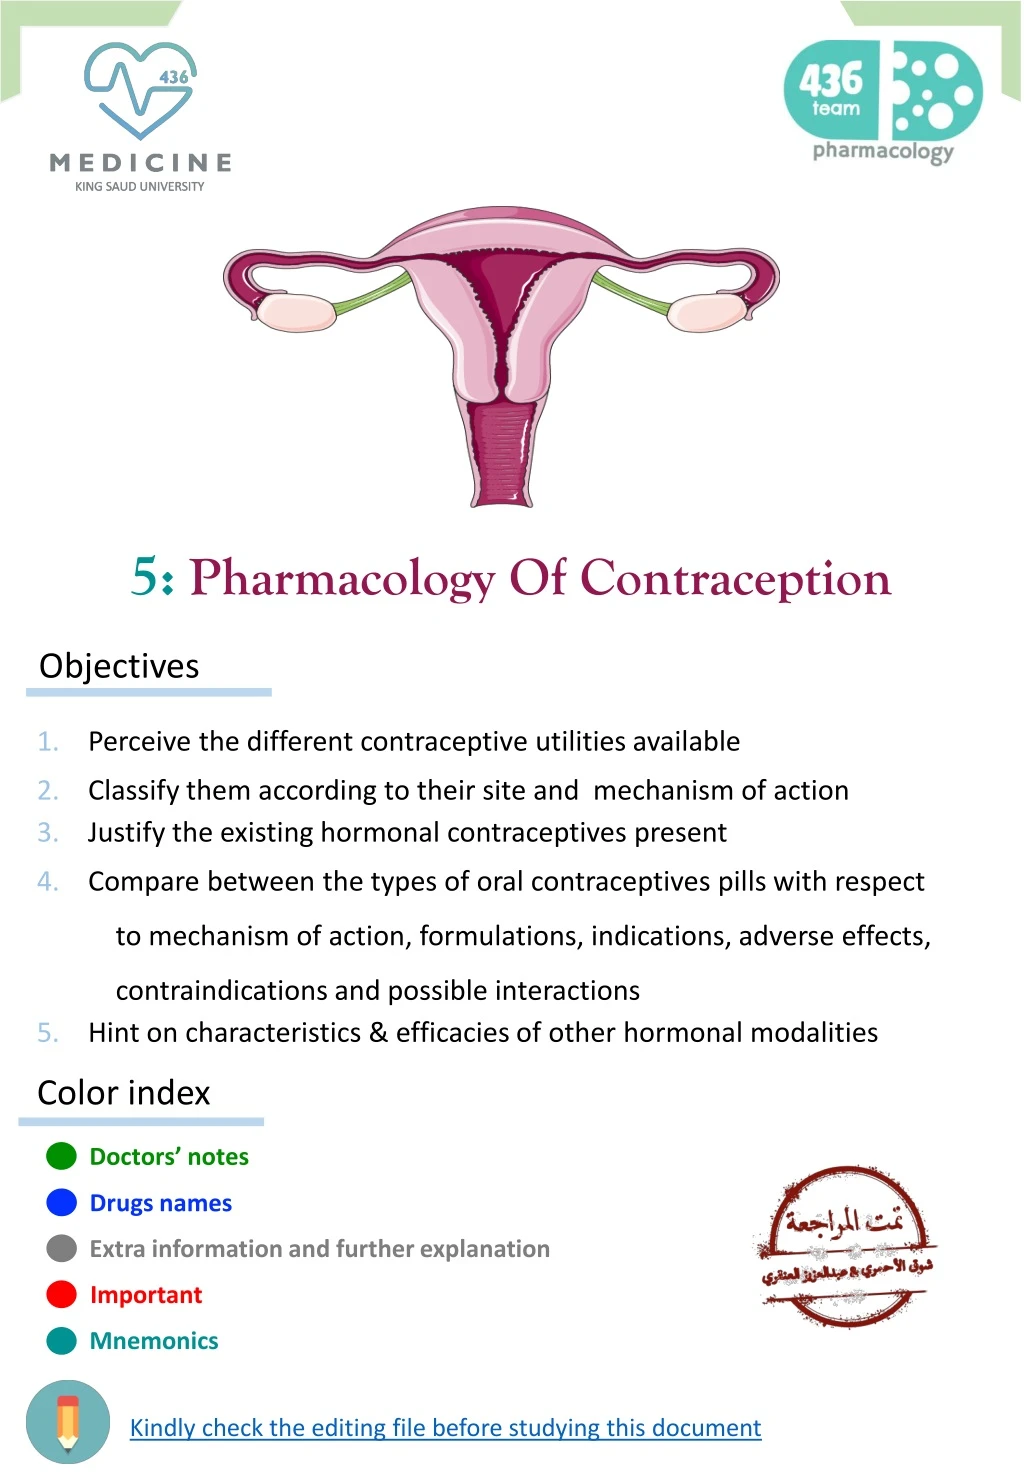 5 pharmacology of contraception